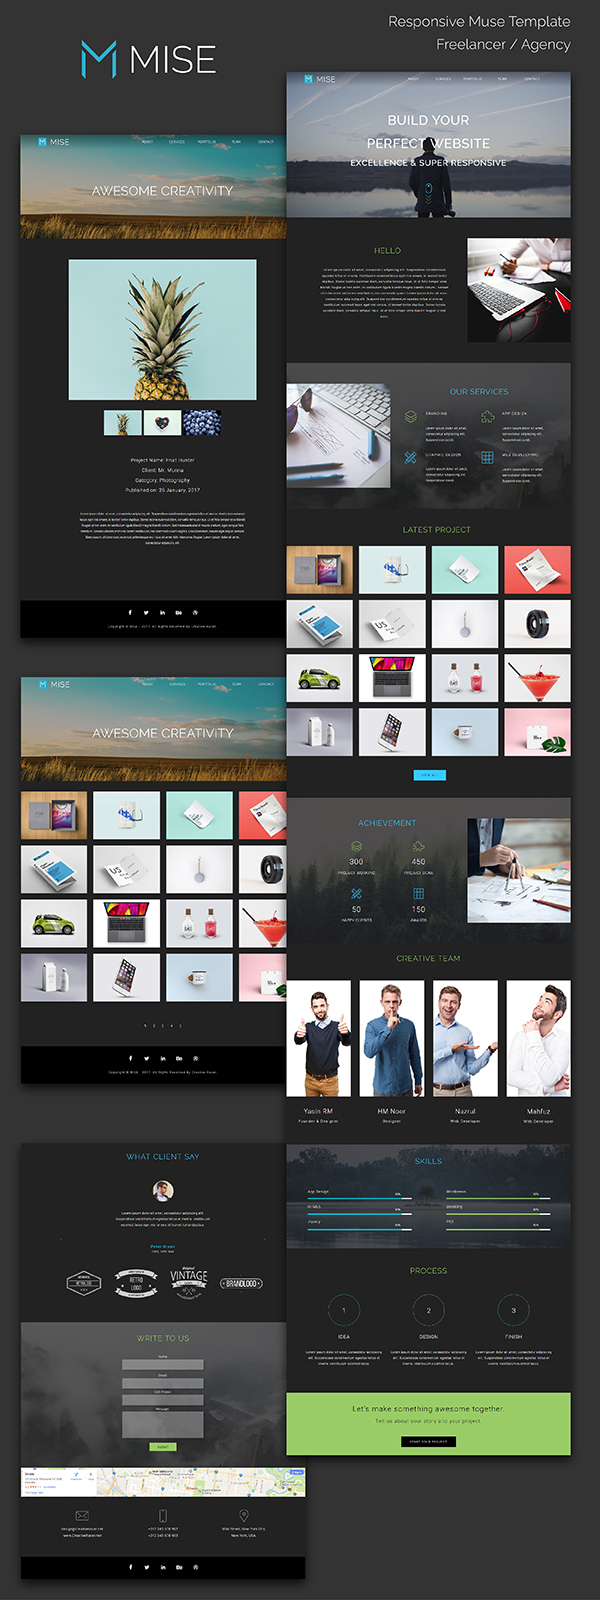 mise responsive muse template